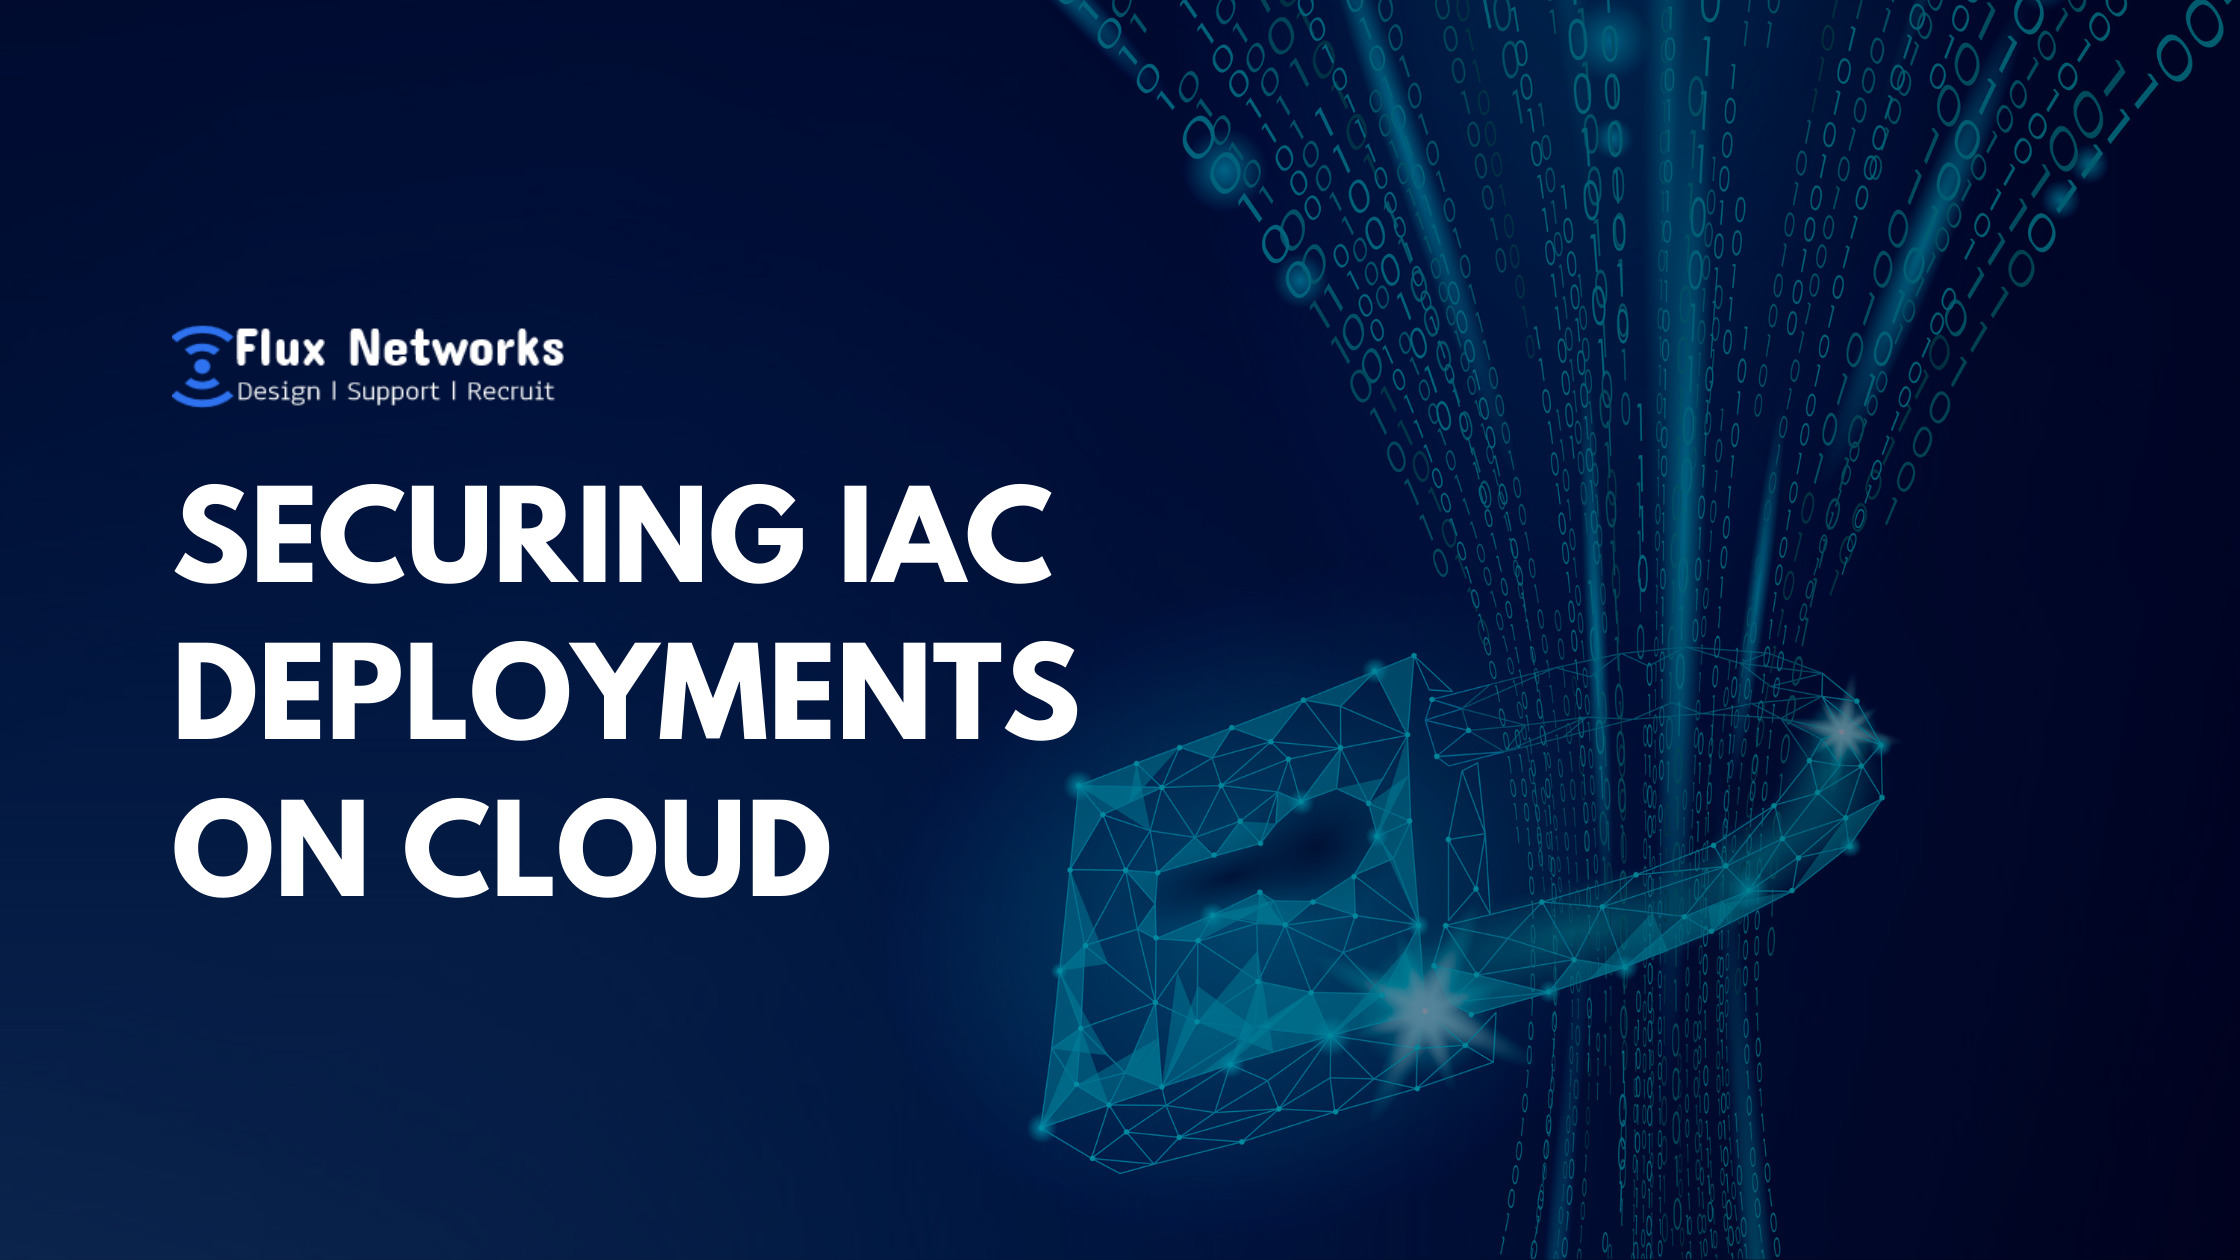 IaC Deployments on Cloud: 5 Proven Ways to Secure